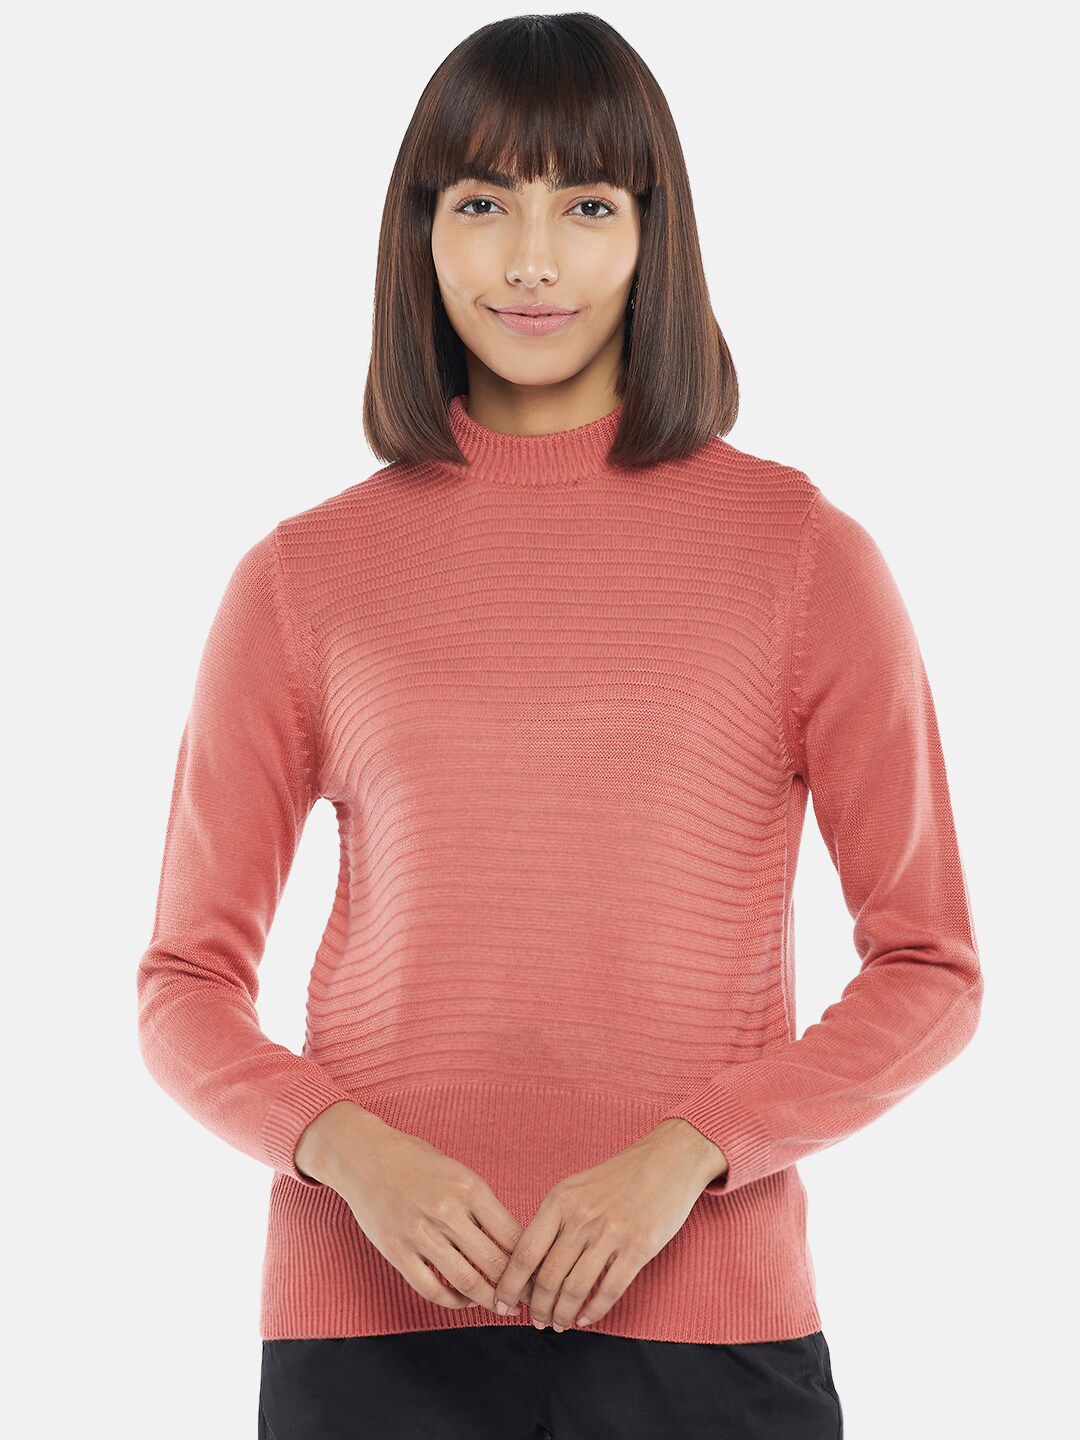 Honey by Pantaloons Pink Acrylic Top Price in India